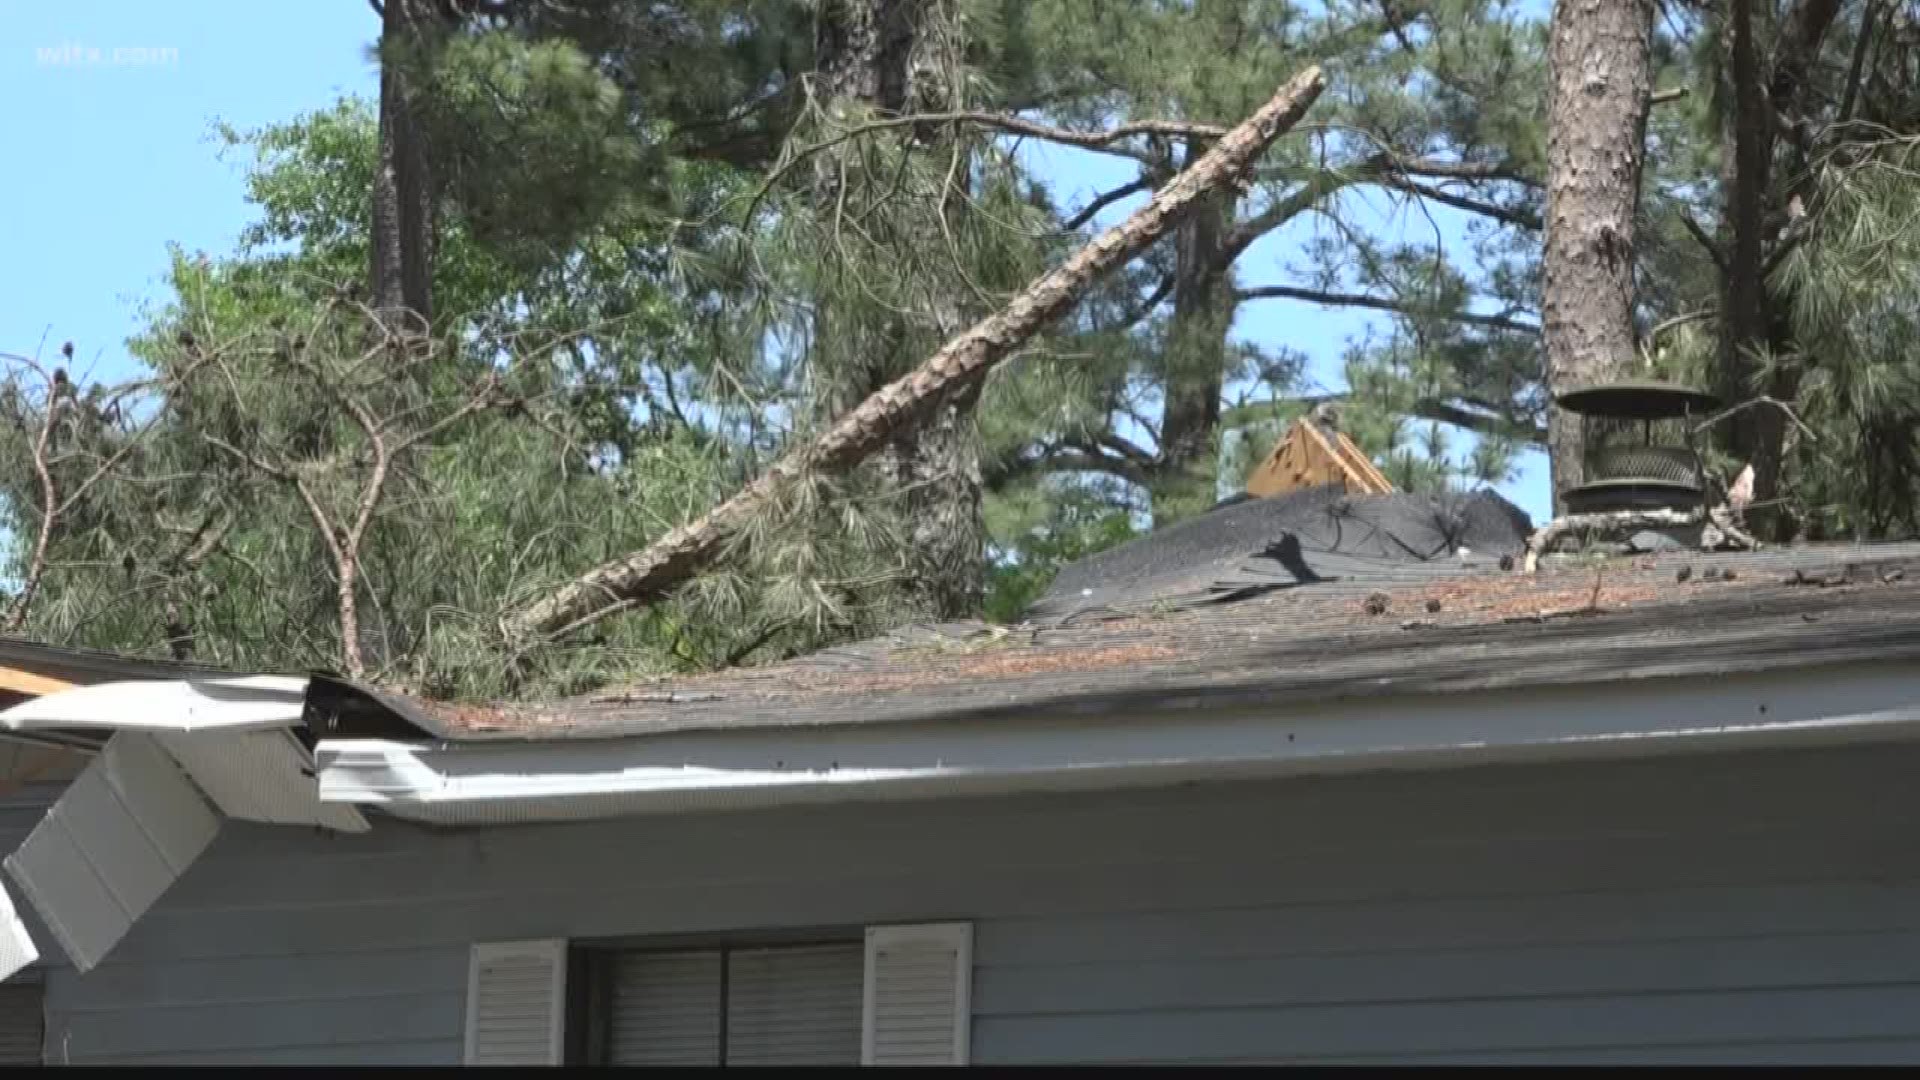 A 3-year-old boy remains in critical condition after a tree fell on his home during last Friday's storms in Sumter.